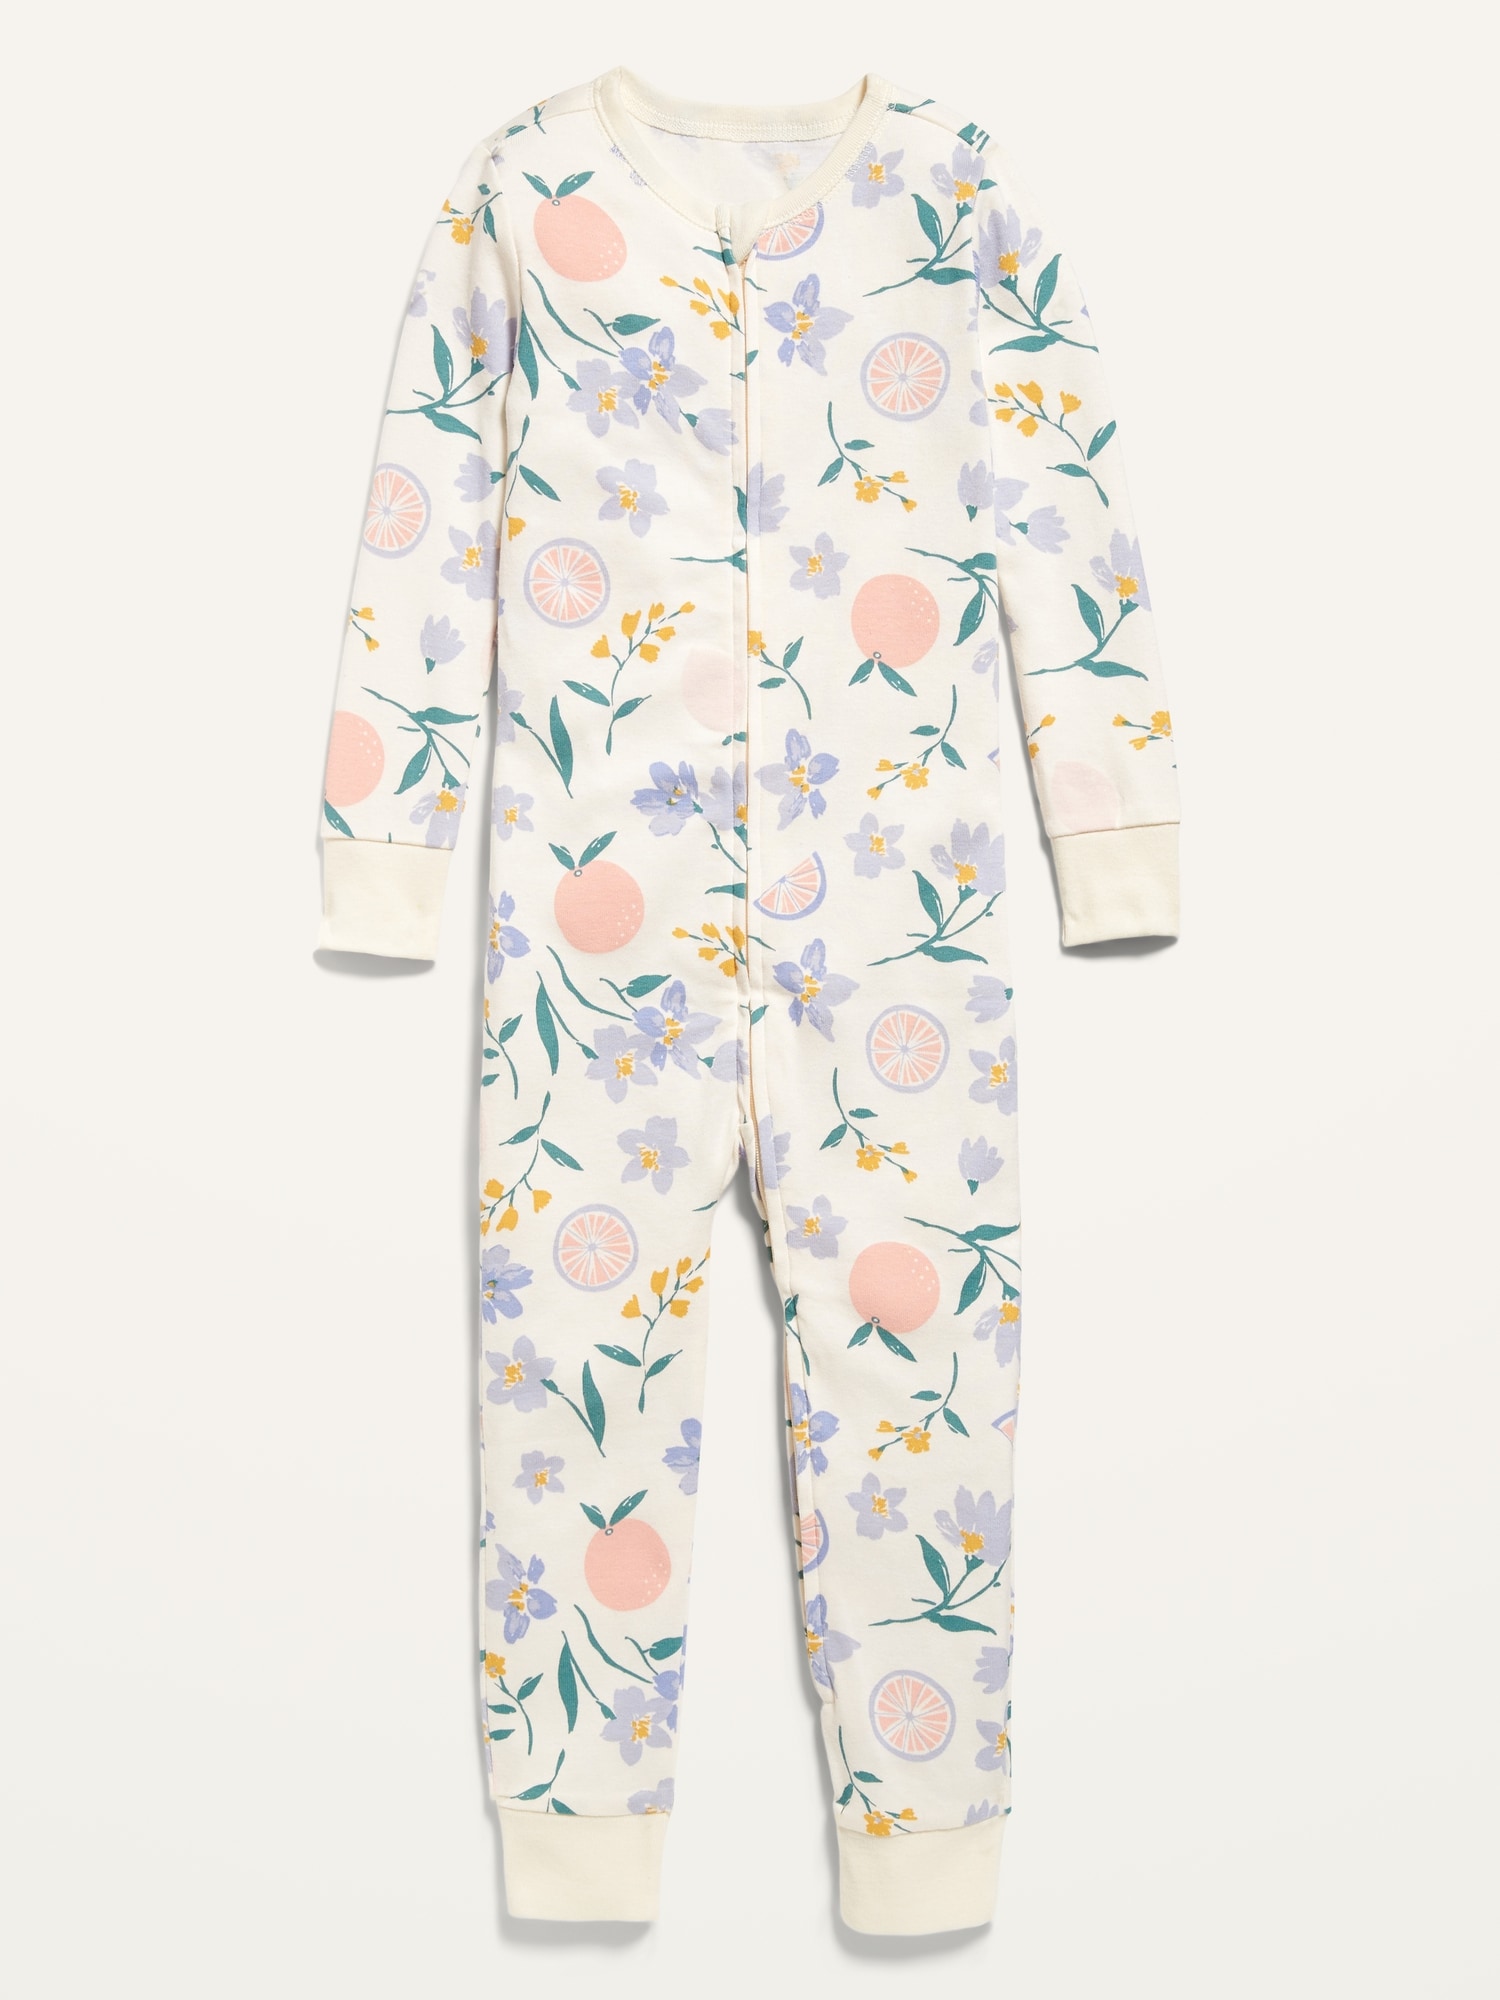 Oldnavy Unisex 2-Way-Zip Printed Pajama One-Piece for Toddler & Baby Hot Deal